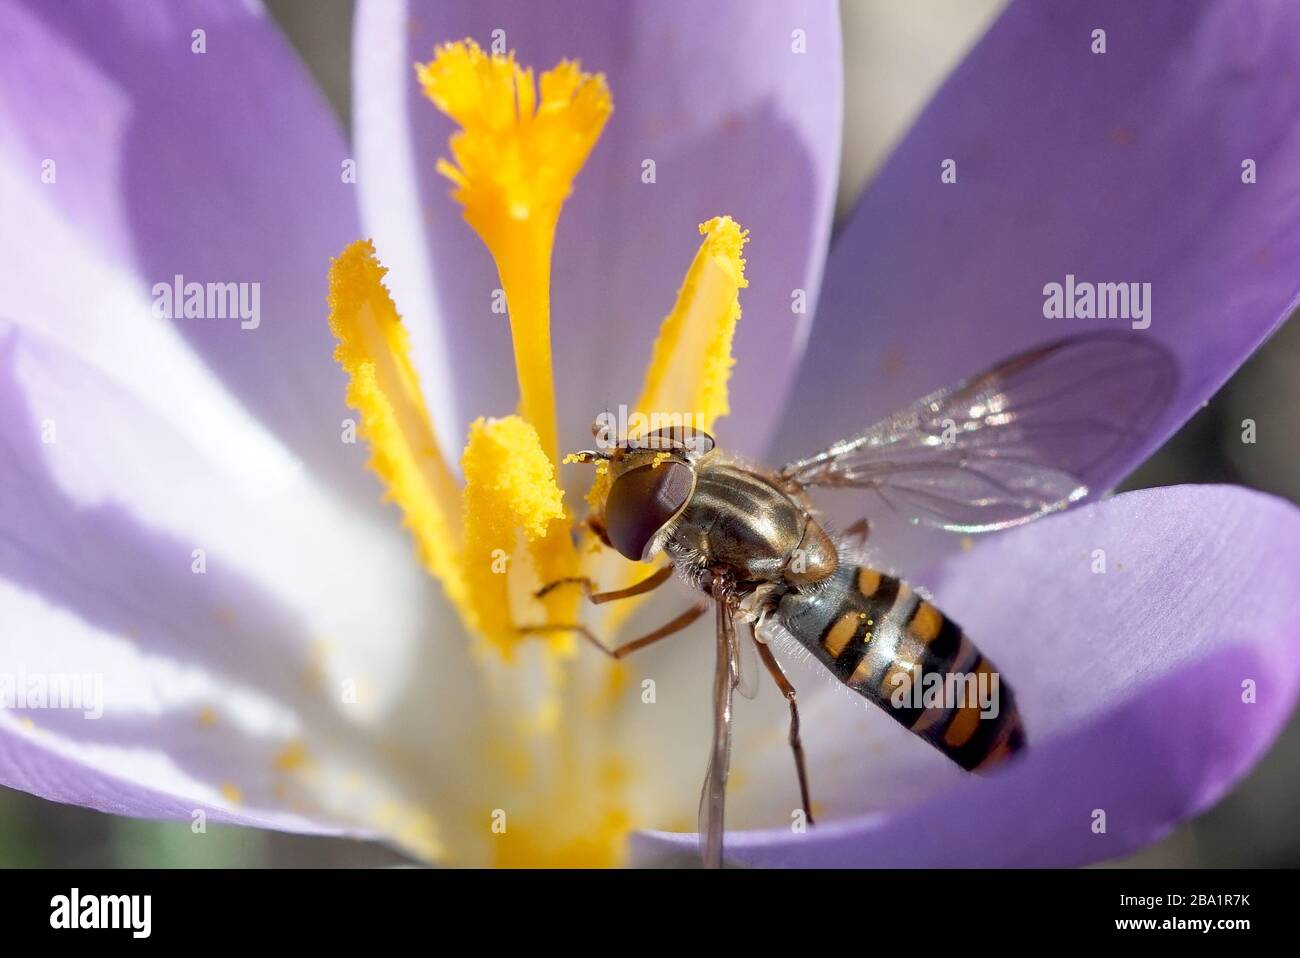 marmalade hoverfly eats crocus pollen in early spring in the garden Stock Photo